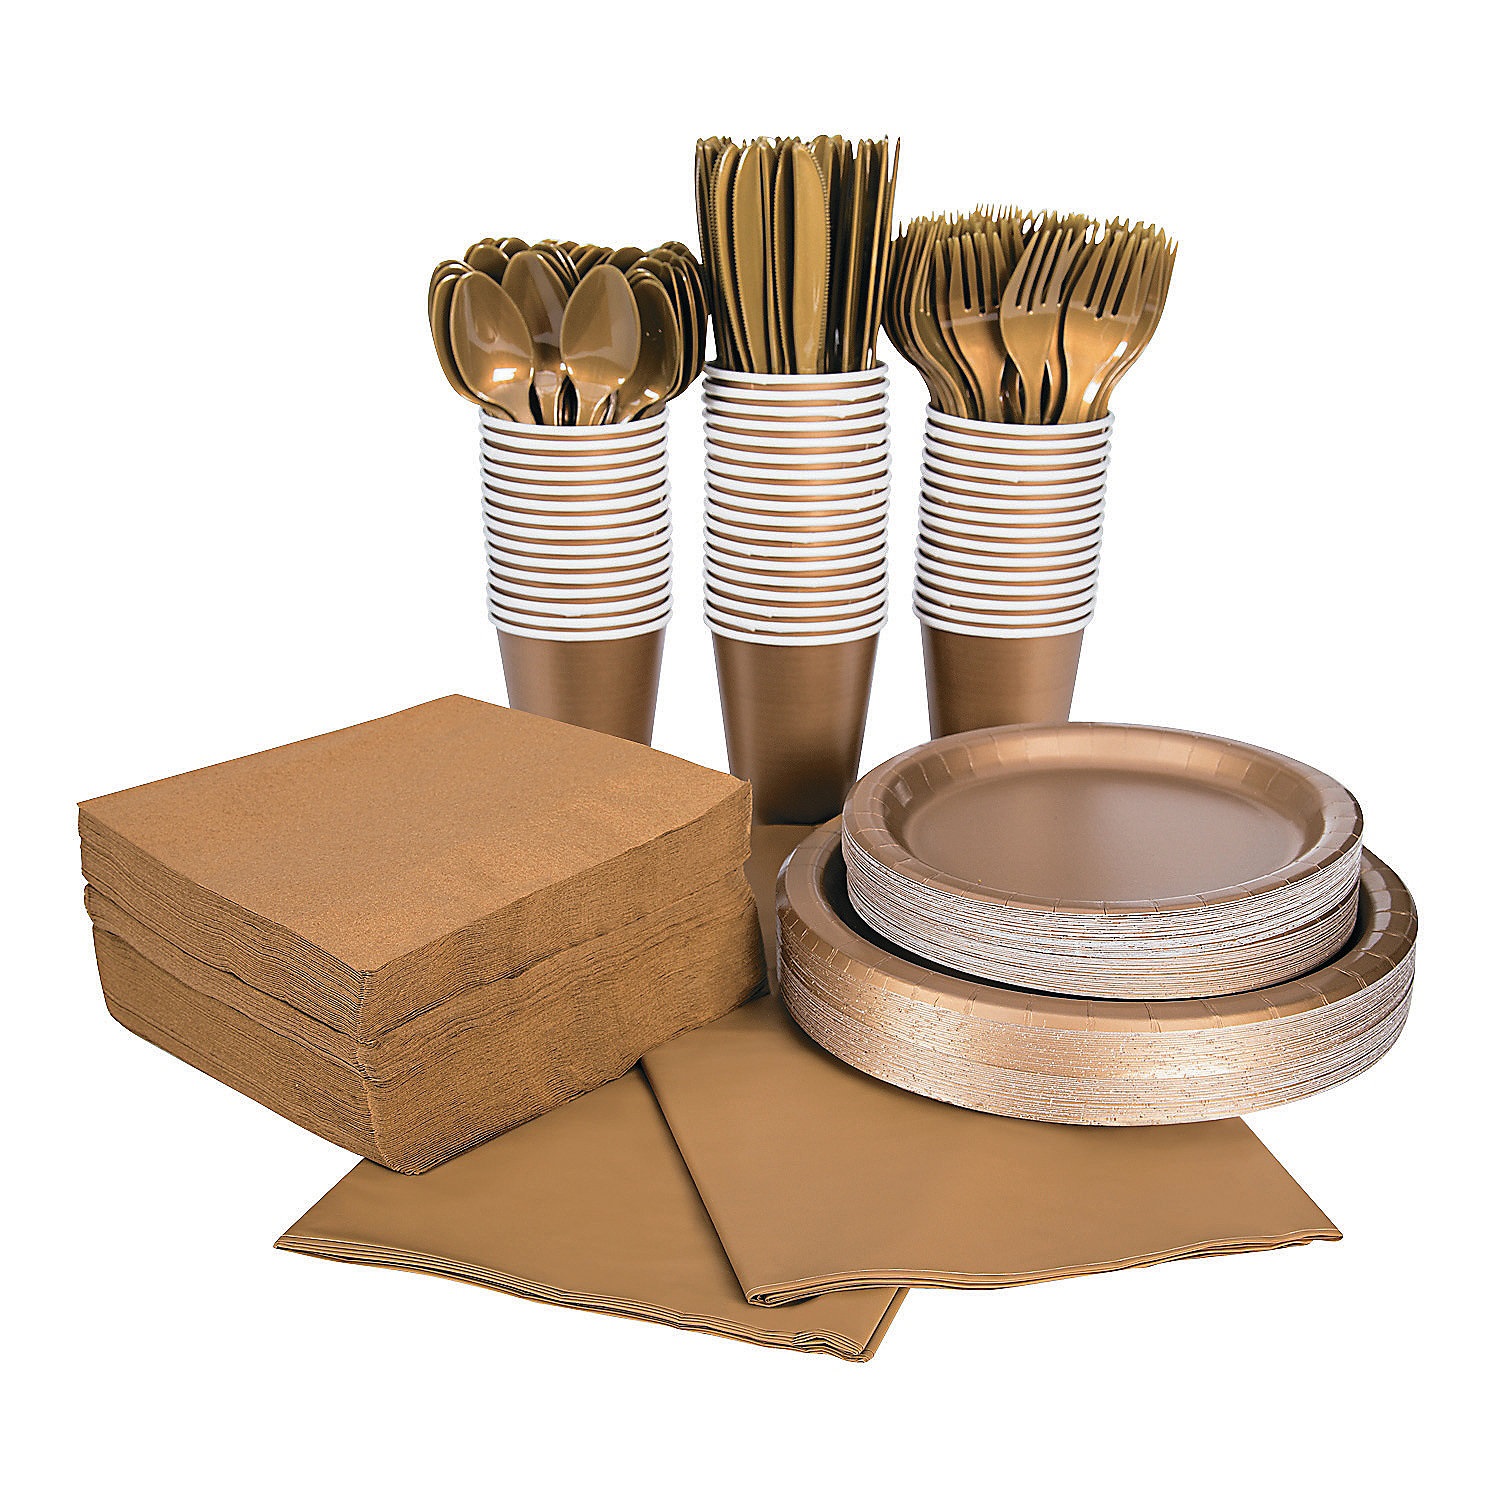 metallic-gold-tableware-kit-for-48-guests_13805810